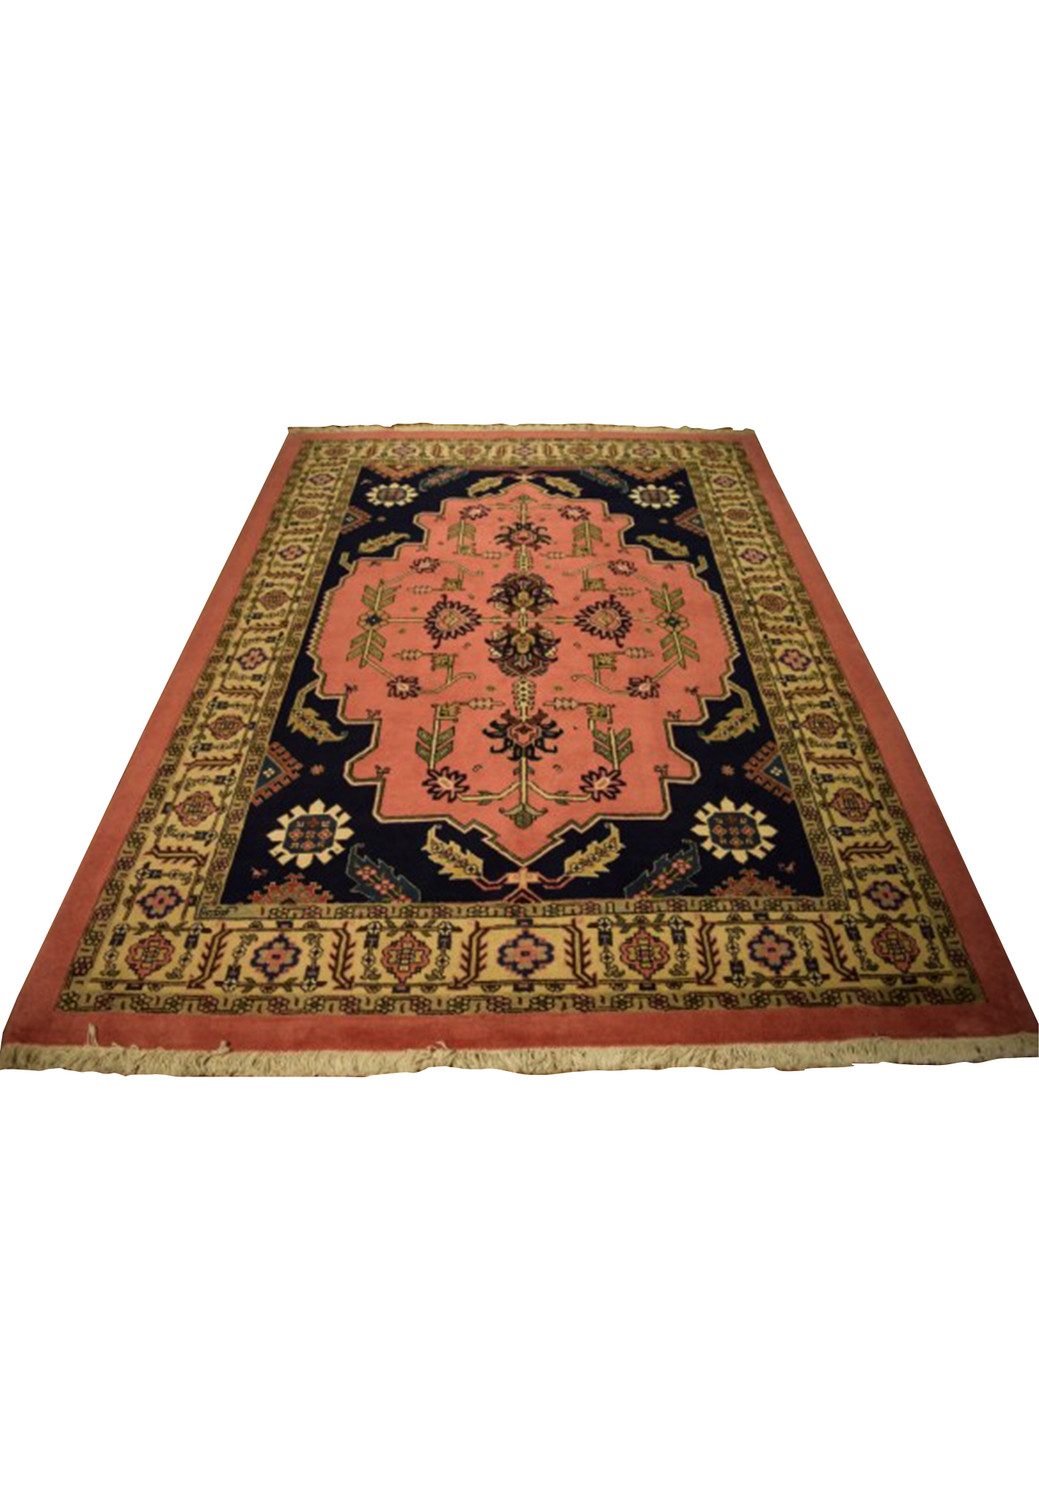 Full view of a Persian Tabriz rug laid out, showcasing its elegant floral design and distinctive color palette